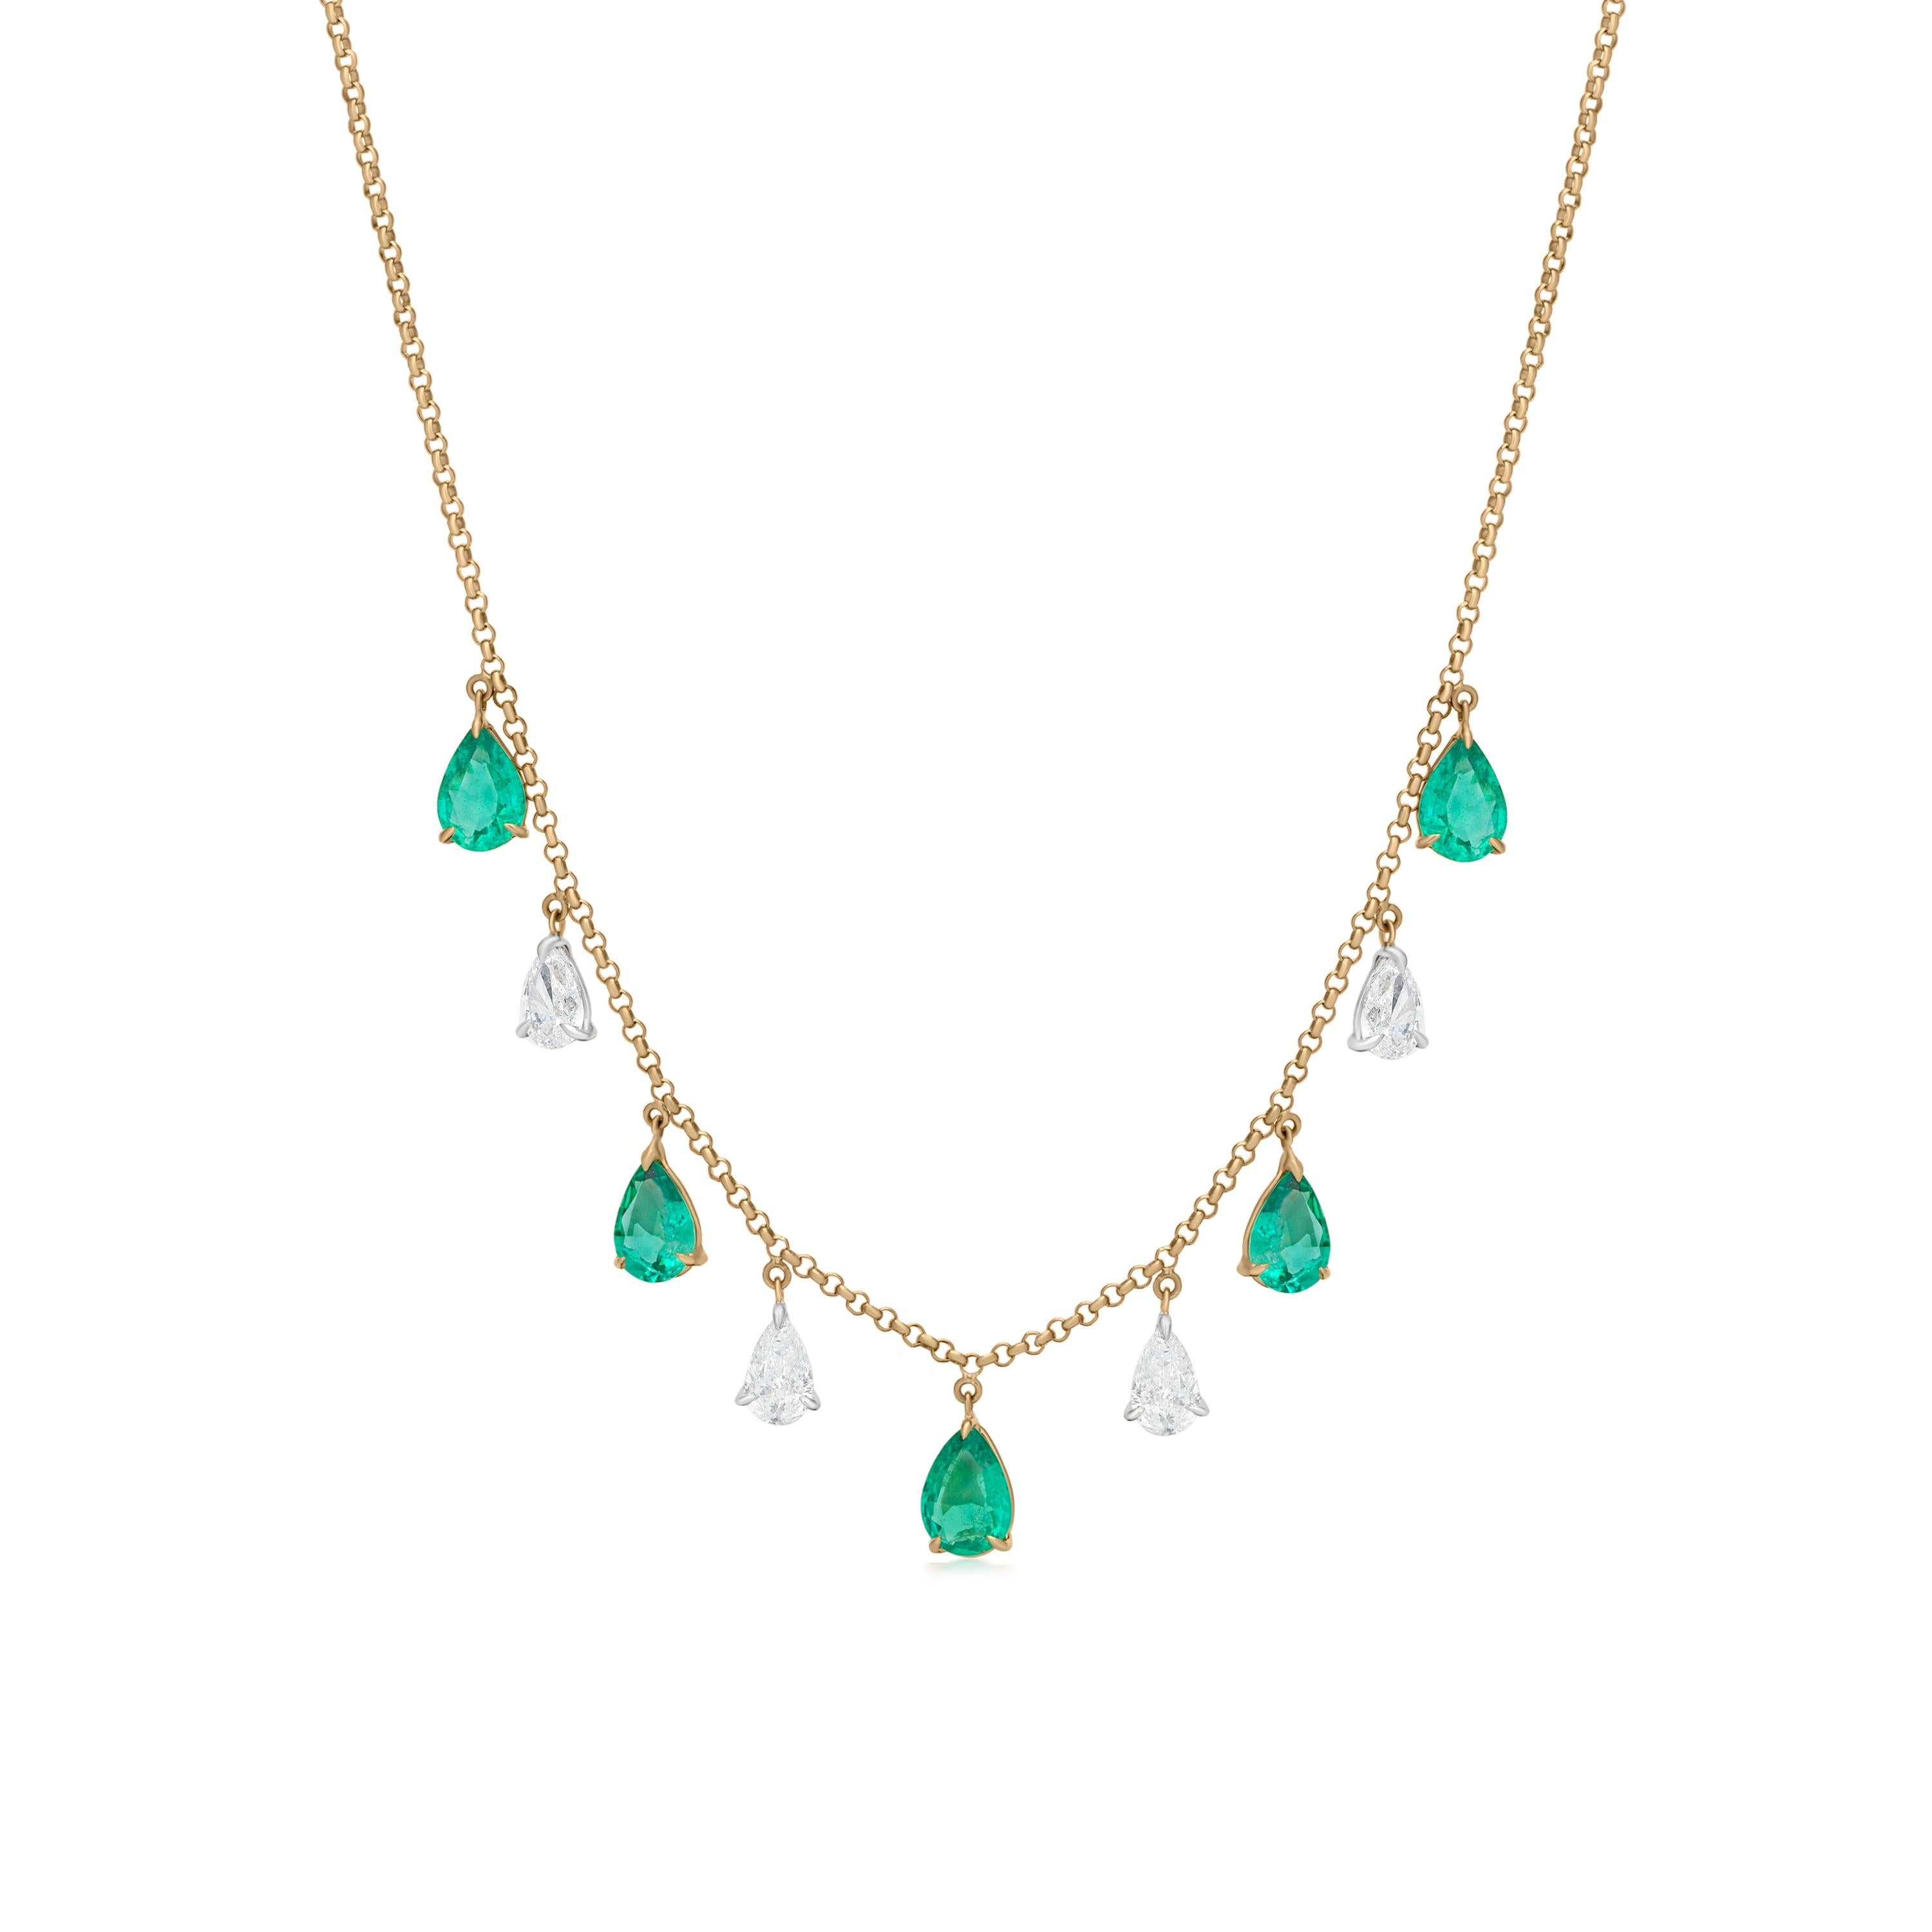 Pear Cut Nigaam 3.51cttw Pear-Shaped Emerald & Diamond Drop Necklace in 18k Yellow Gold